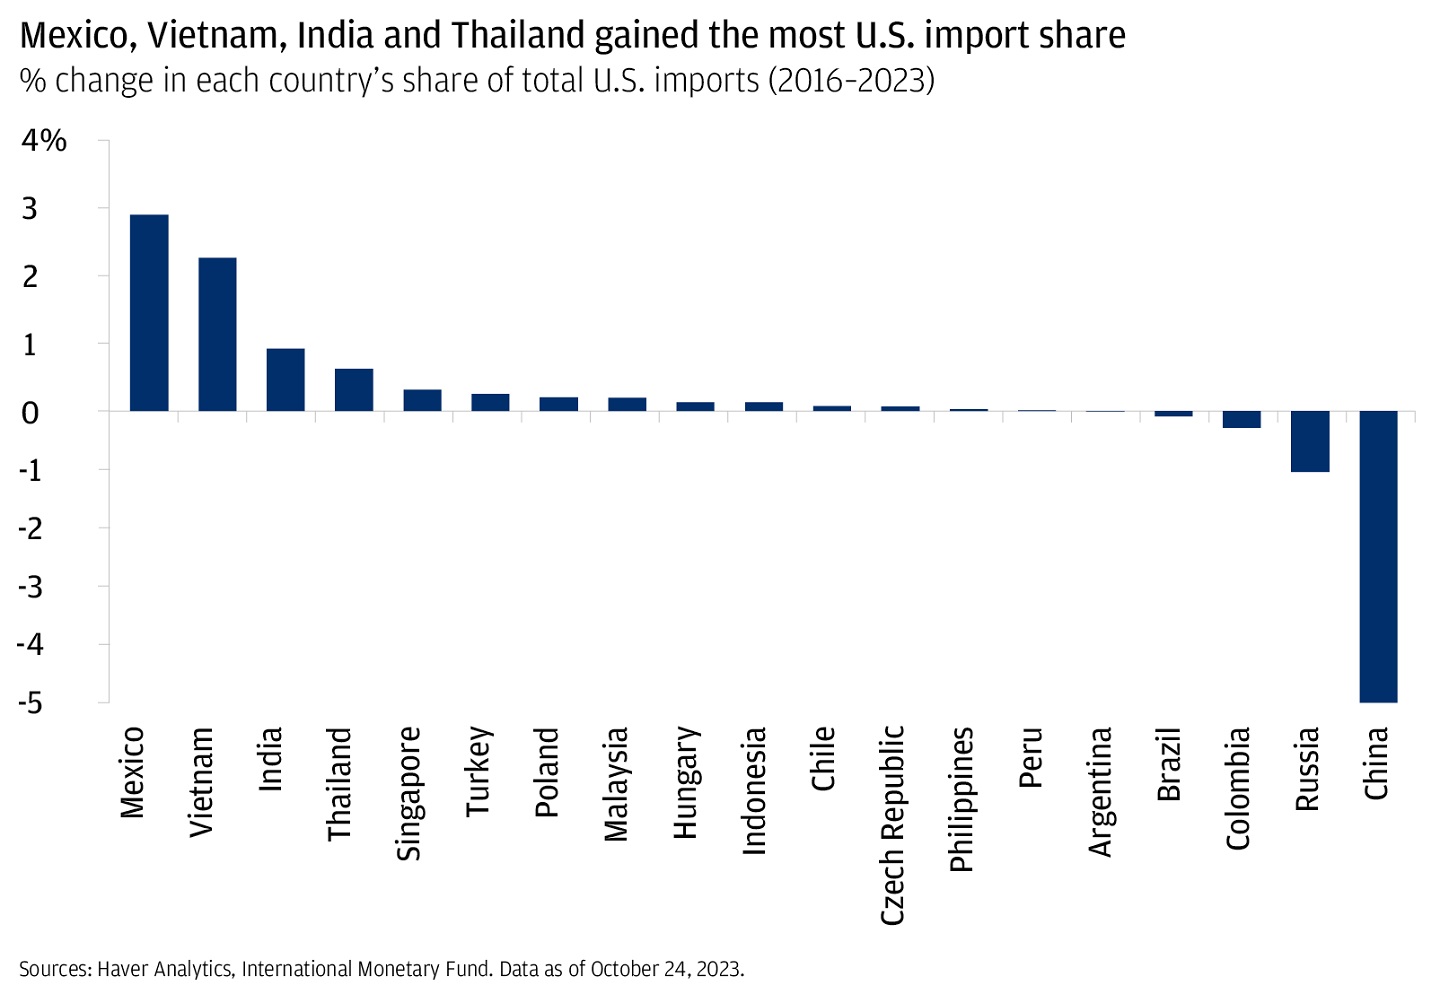 This bar graph shows the % change in each country’s share of total U.S. imports from 2016 to 2023 (ranked from highest to lowest).